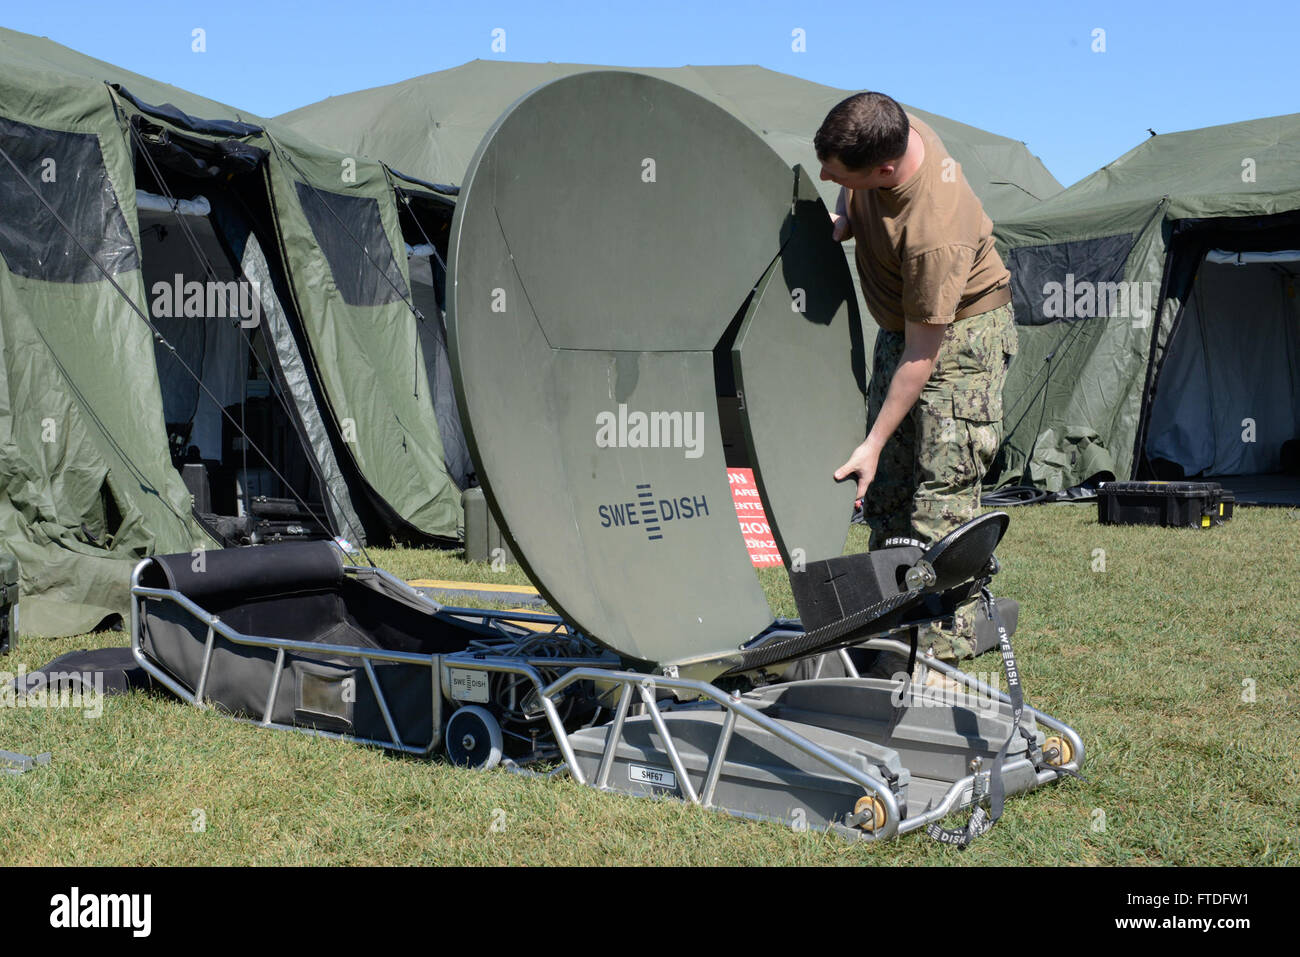 150921-N-UE250-028 GRICIGNANO, Italy (Sept. 21, 2015) Electronics Technician 1st Class Nicholas Cummings, assigned to Commander, Naval Forces Europe Det. Maritime Ashore Support Team (MAST), assembles a satellite dish at a mobile command center on U.S. Naval Support Activity Naples, Italy Sept. 21, 2015. MAST is currently conducting a Continuity of Operations Planning and crisis management field training exercise. (U.S. Navy photo by Mass Communication Specialist 2nd Class Corey Hensley/Released) Stock Photo